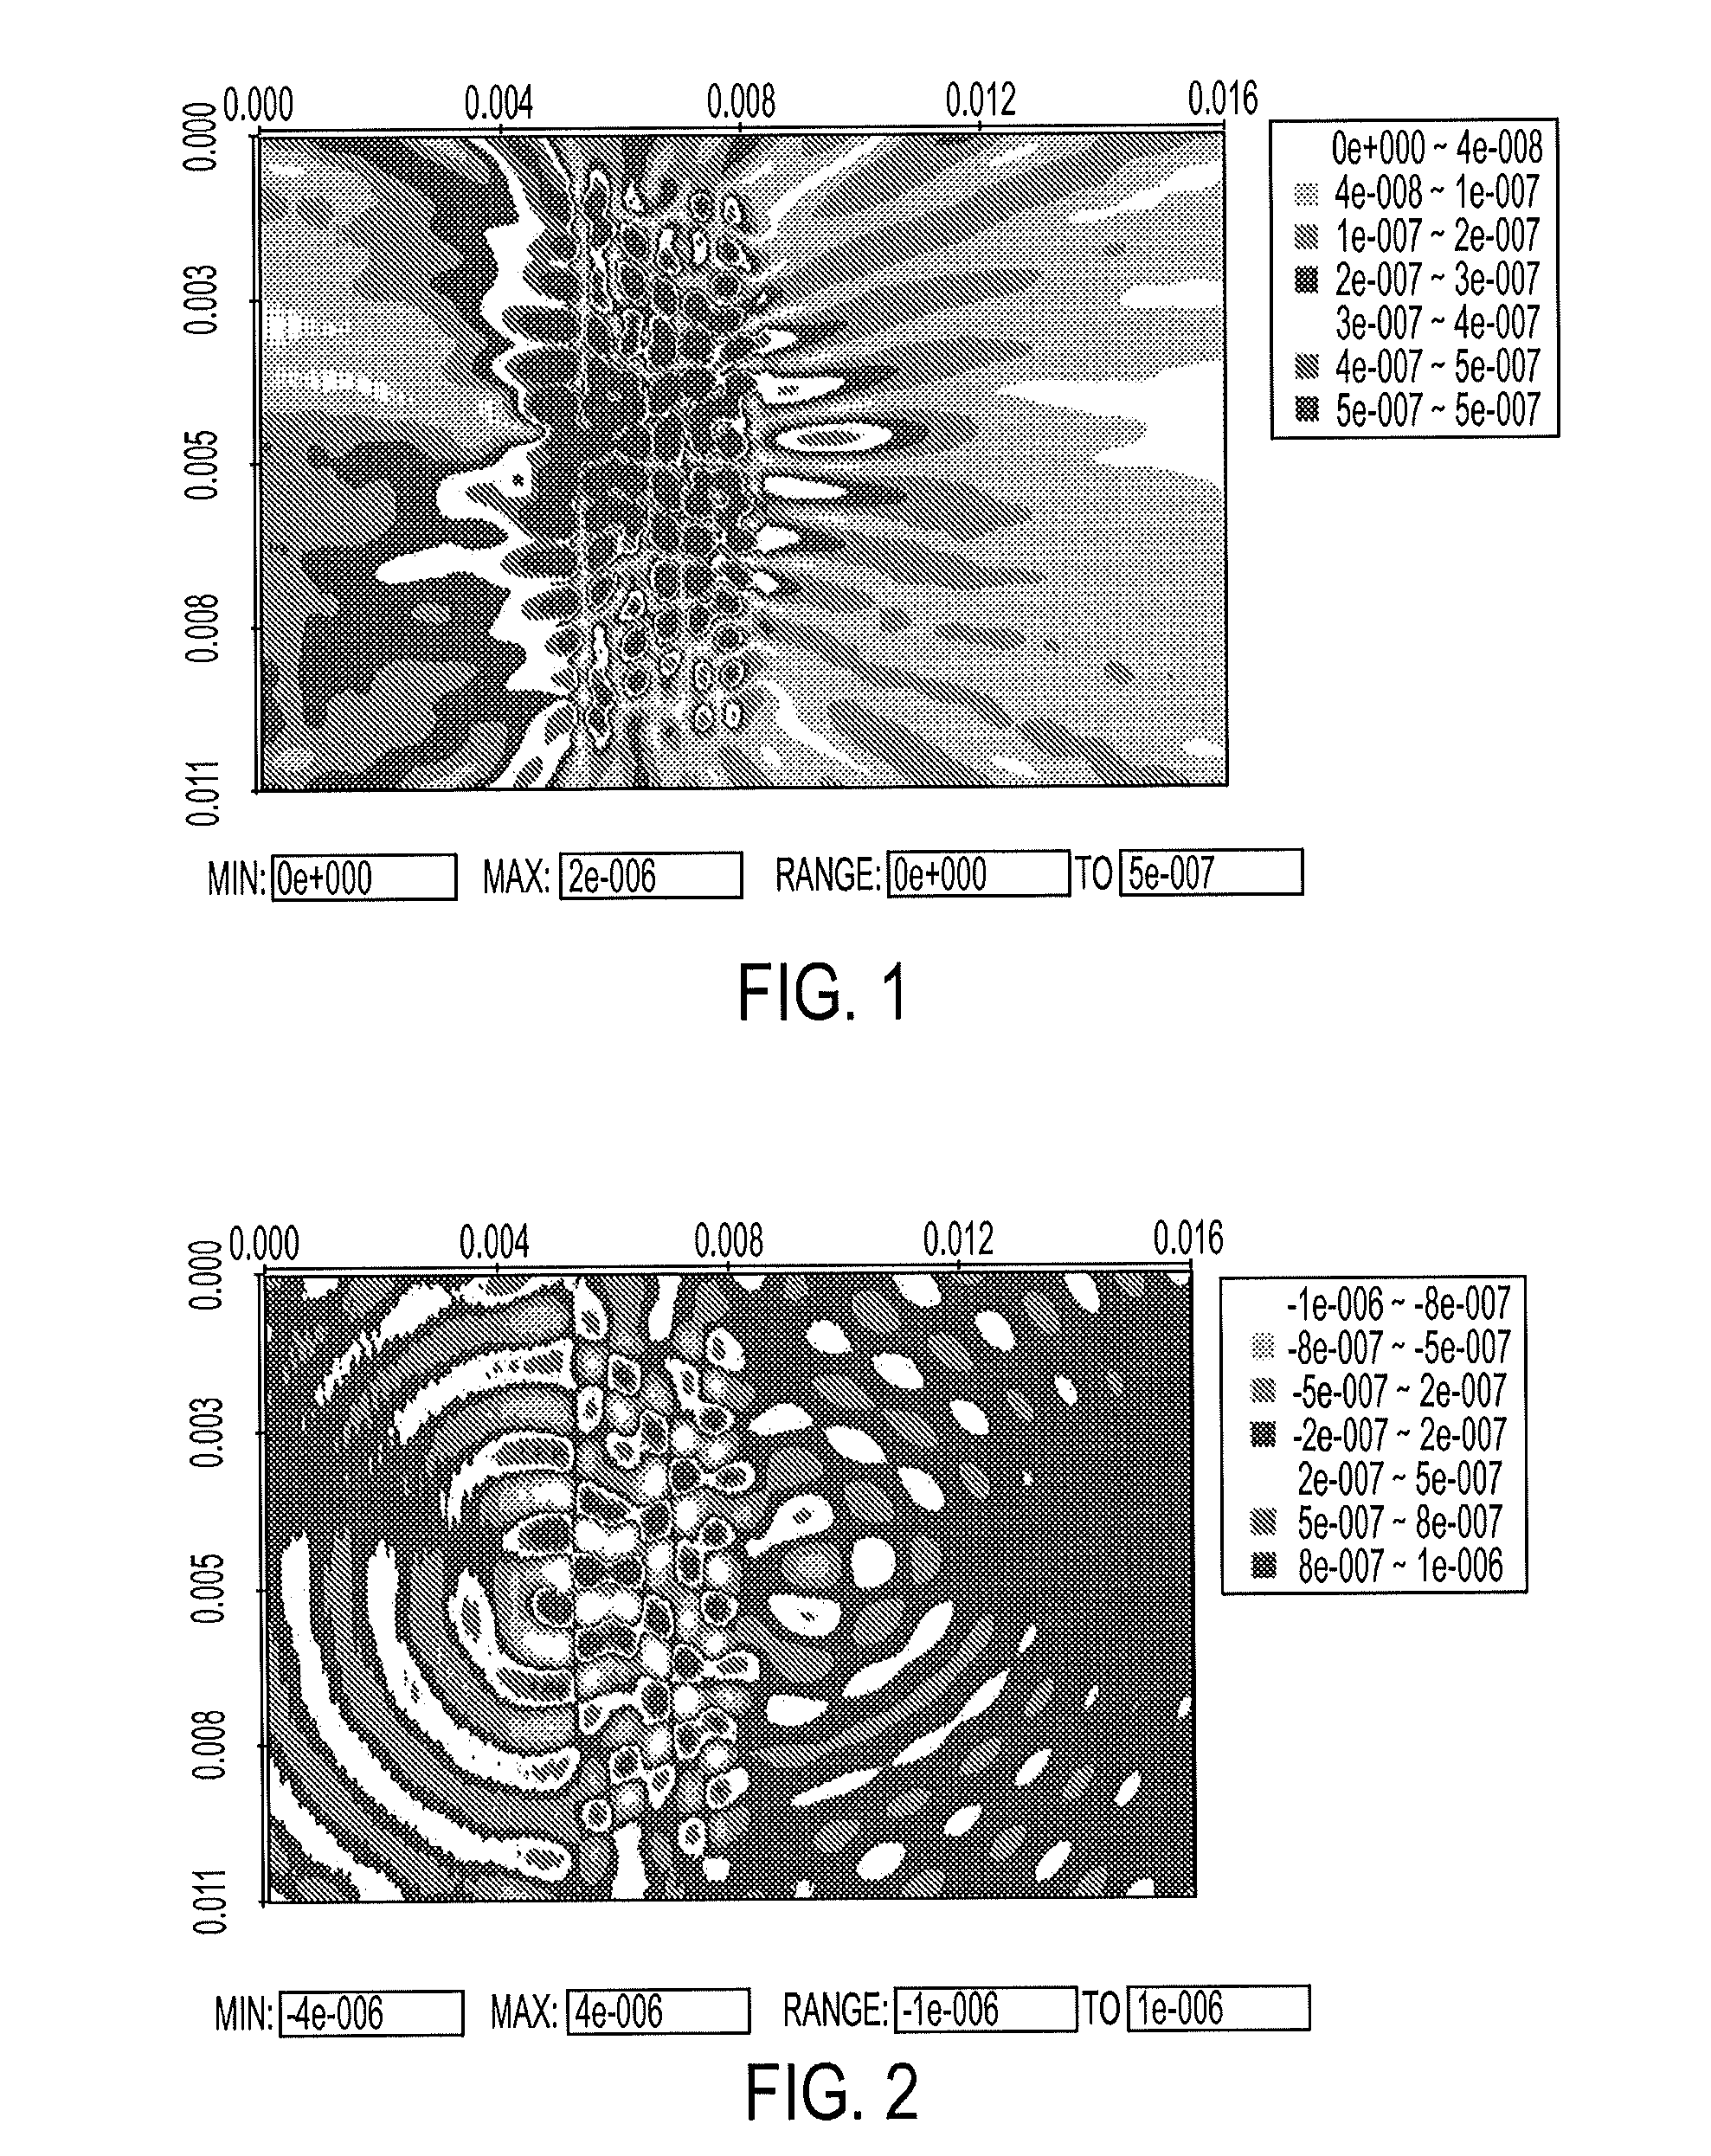 Solid-state acoustic metamaterial and method of using same to focus sound